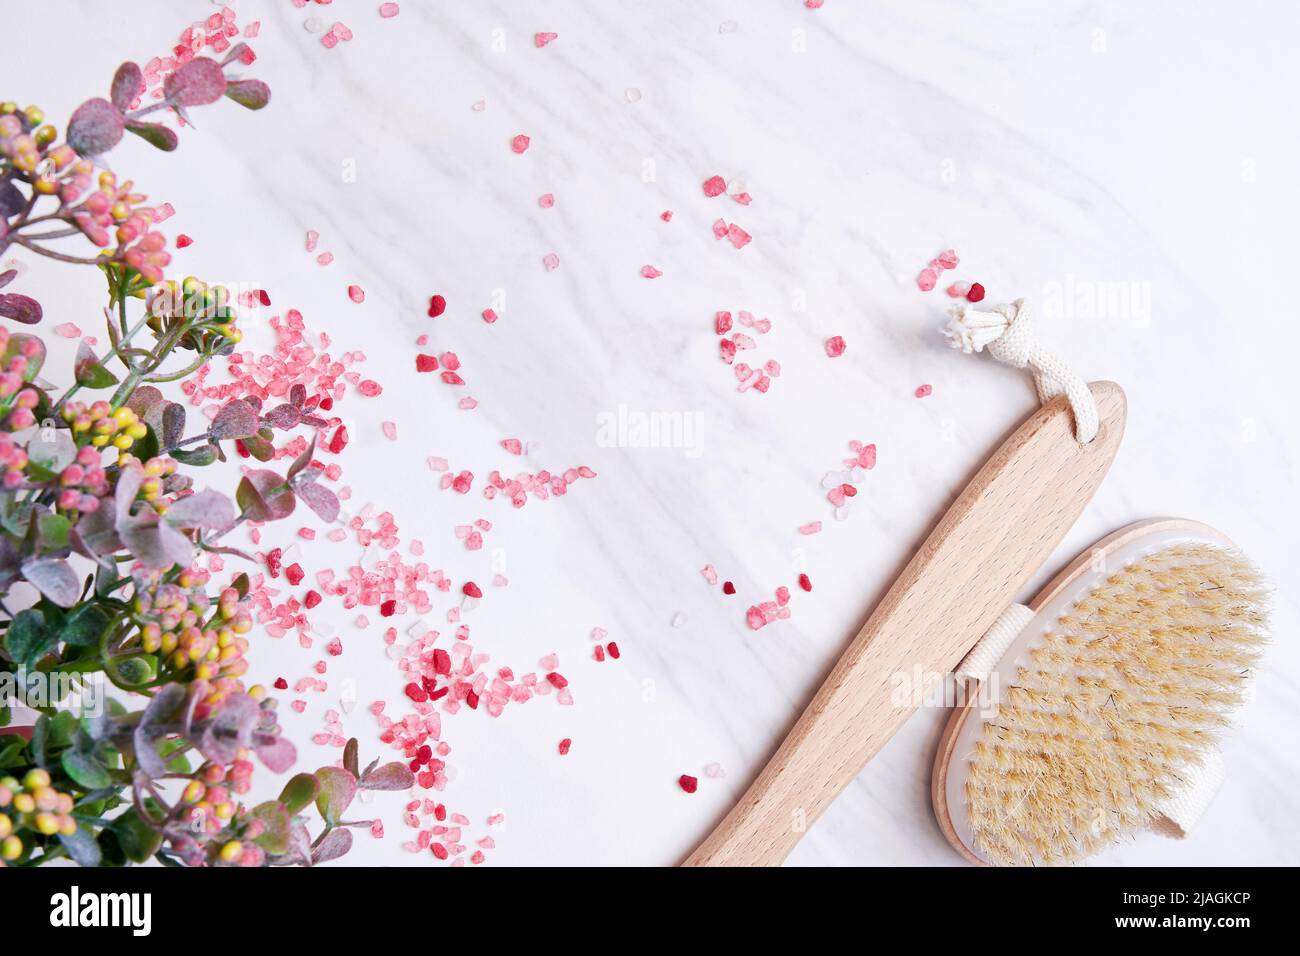 Wooden scrub brush, scented sea salt, flowers and herbs on the marble table. Spa salon backgrounds and concepts Stock Photo